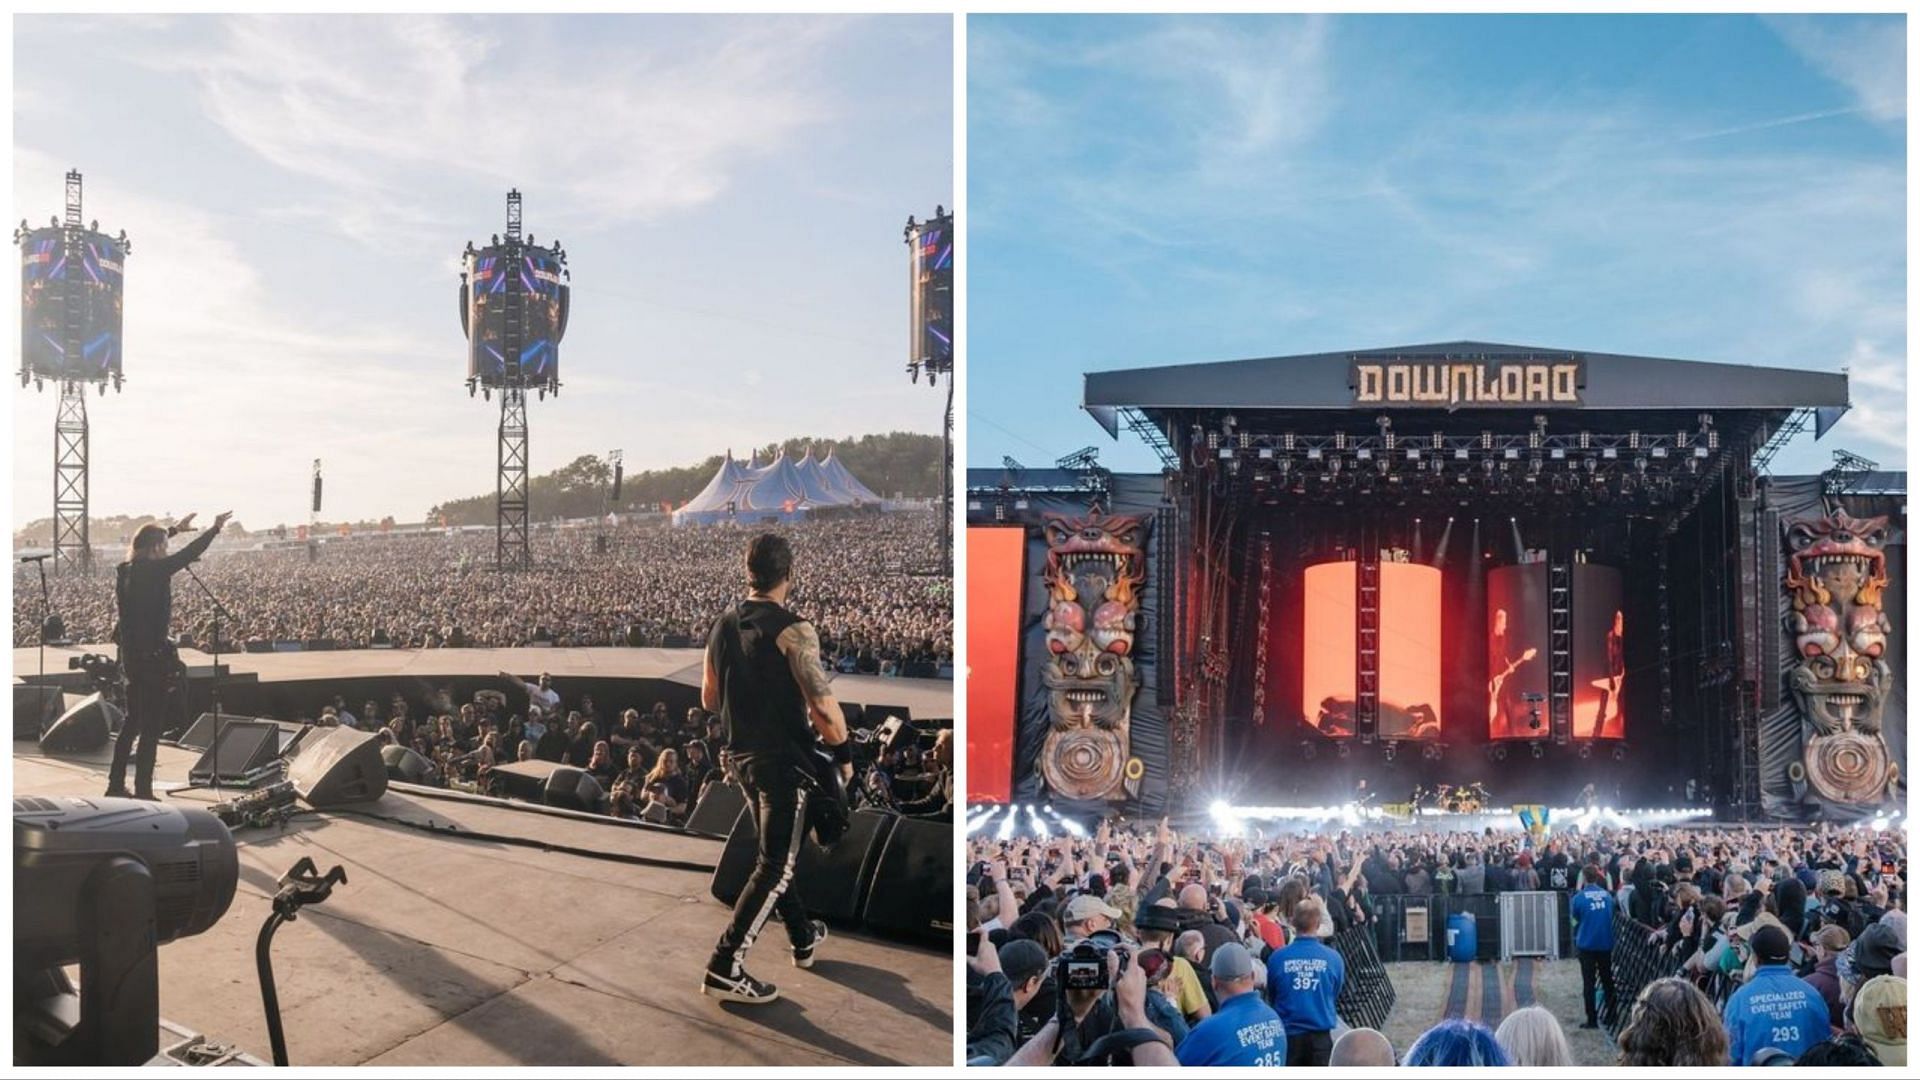 Twin views of Download Festival arena (Images via official Instagram @downloadfest)